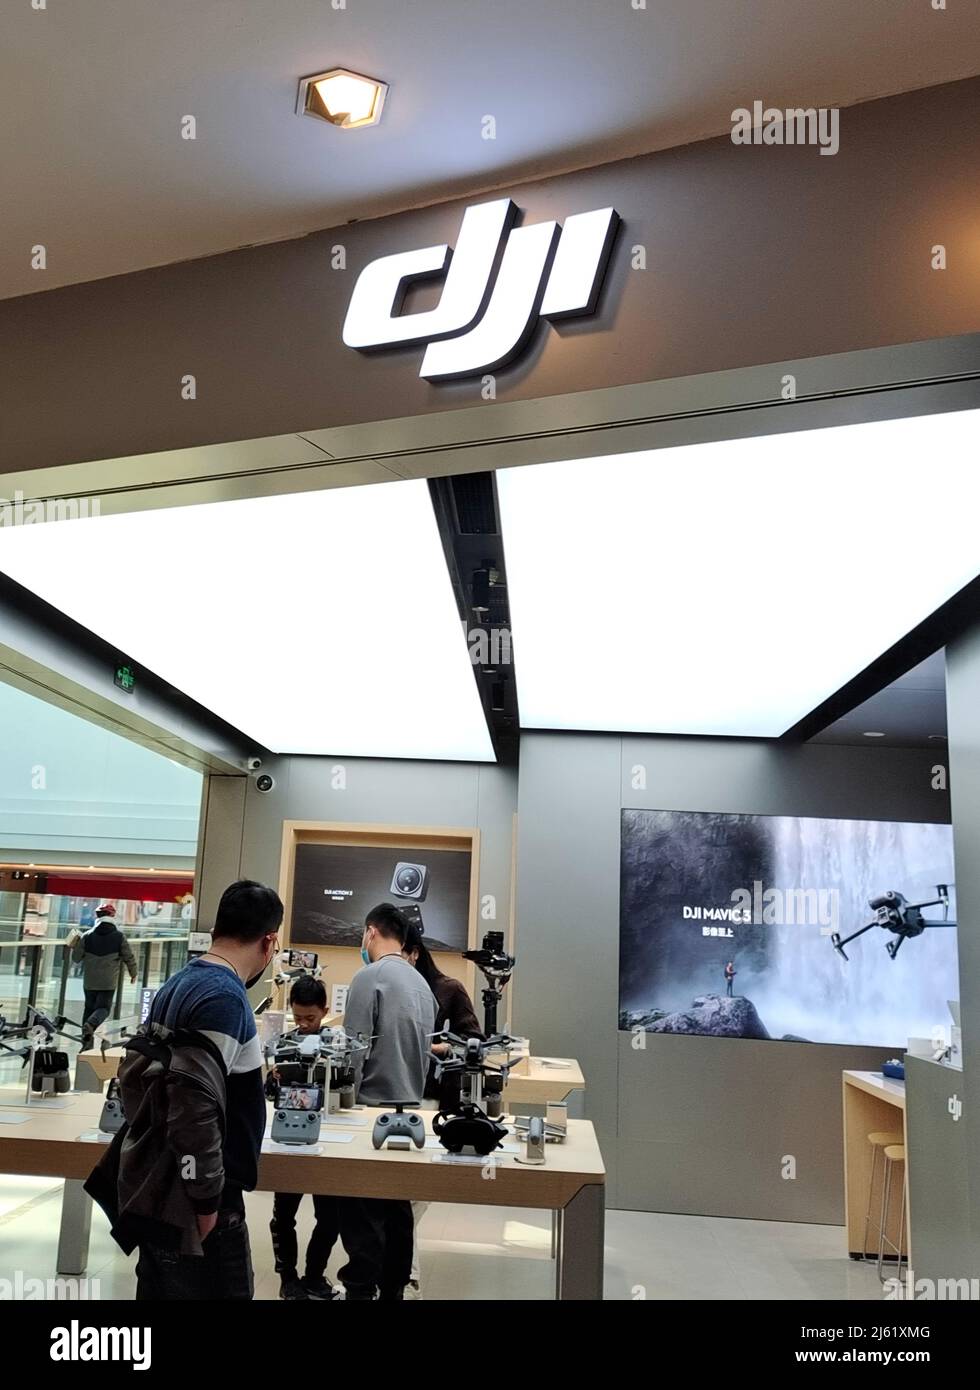 SHANGHAI, CHINA - 27, 2022 - Customers are seen at a DJI drone store Shanghai, China, on December 18, 2021. April 27, 2022 -- Chinese drone DJI has announced